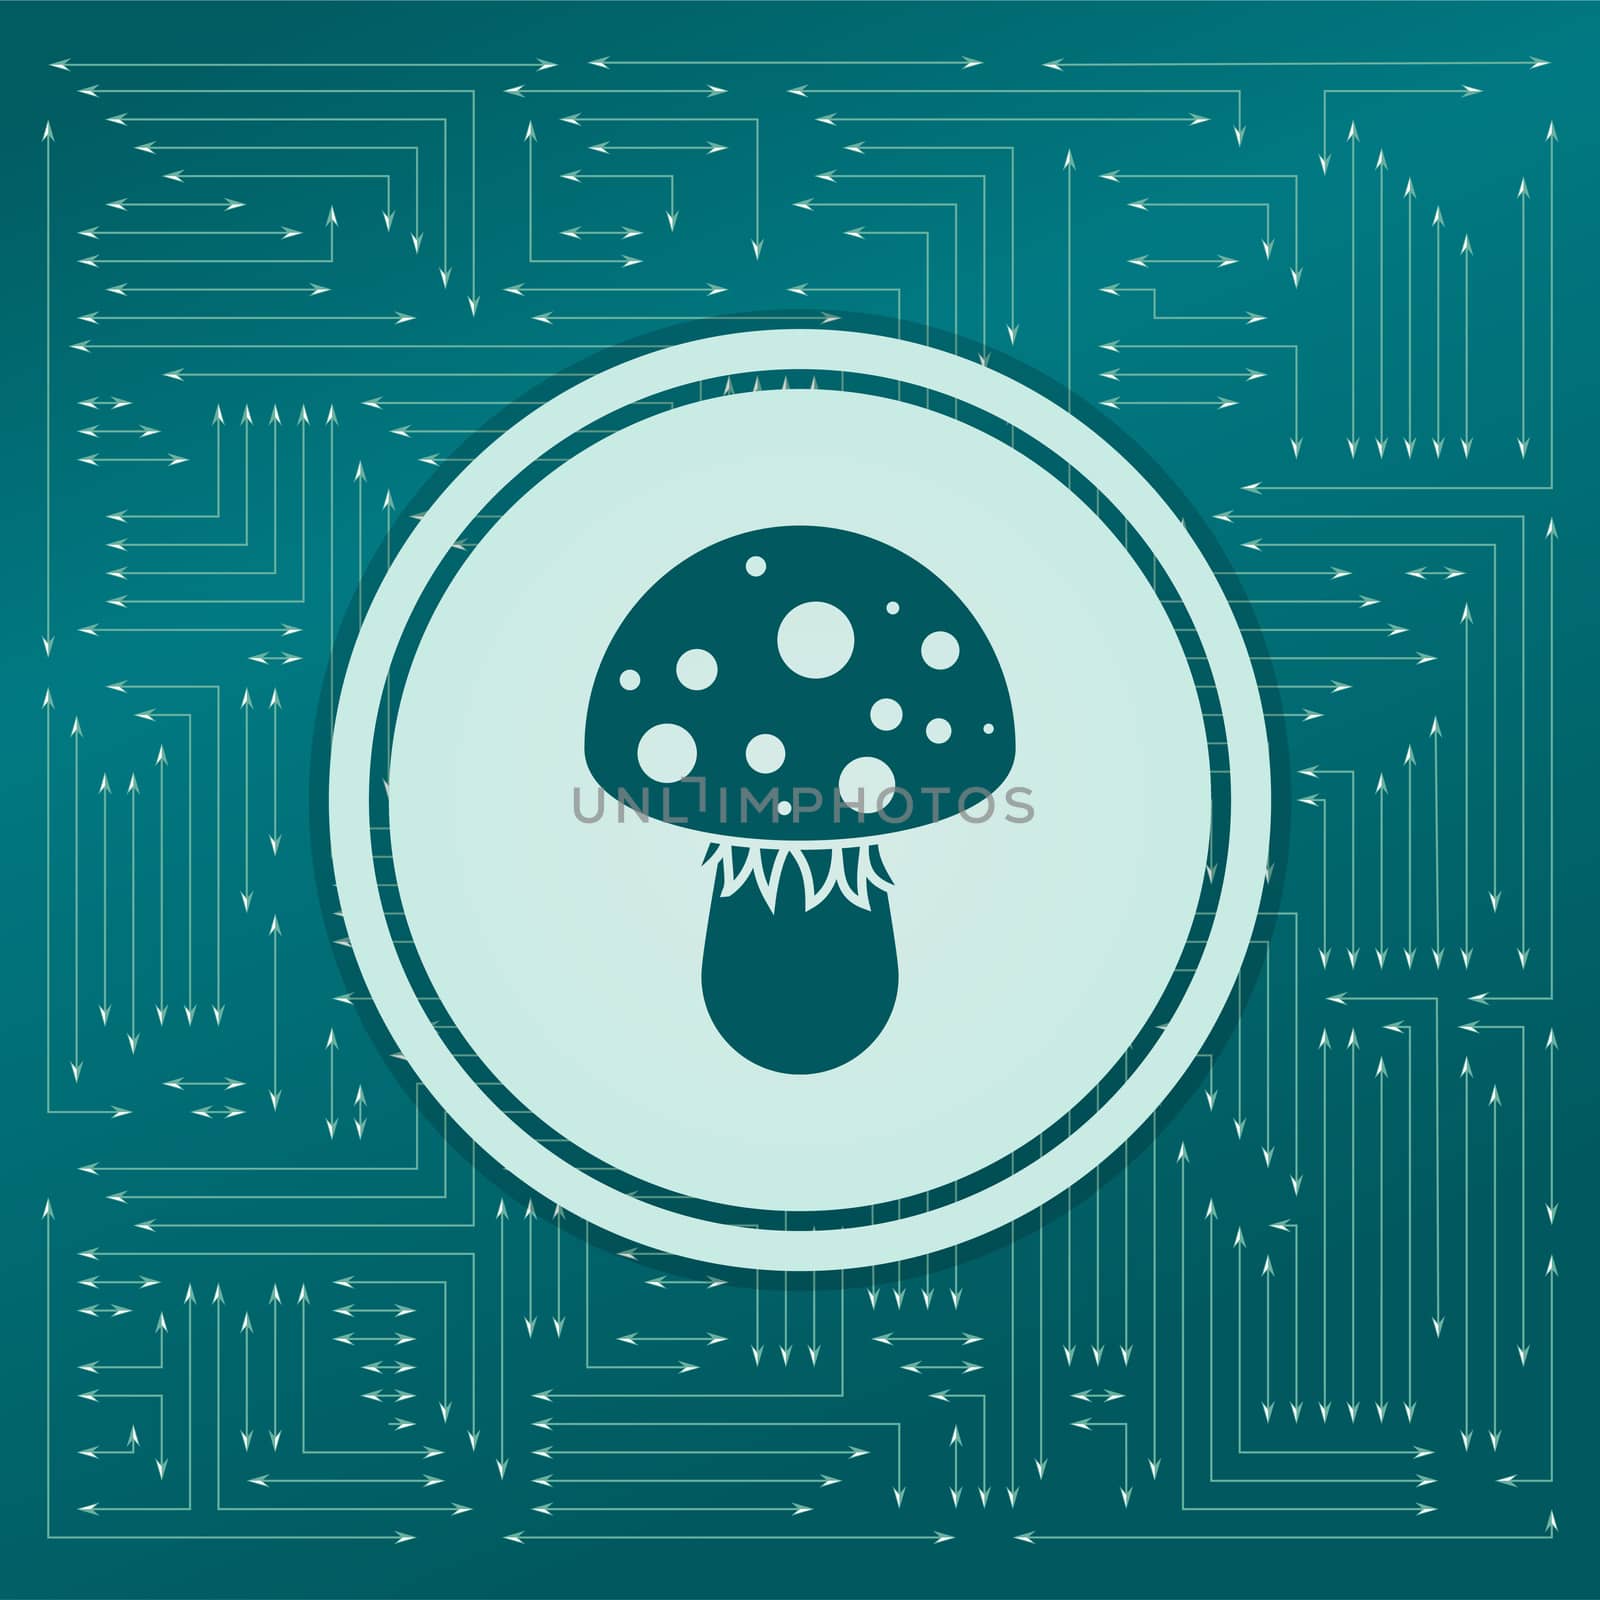 fly agaric mushroom icon on a green background, with arrows in different directions. It appears on the electronic board. illustration